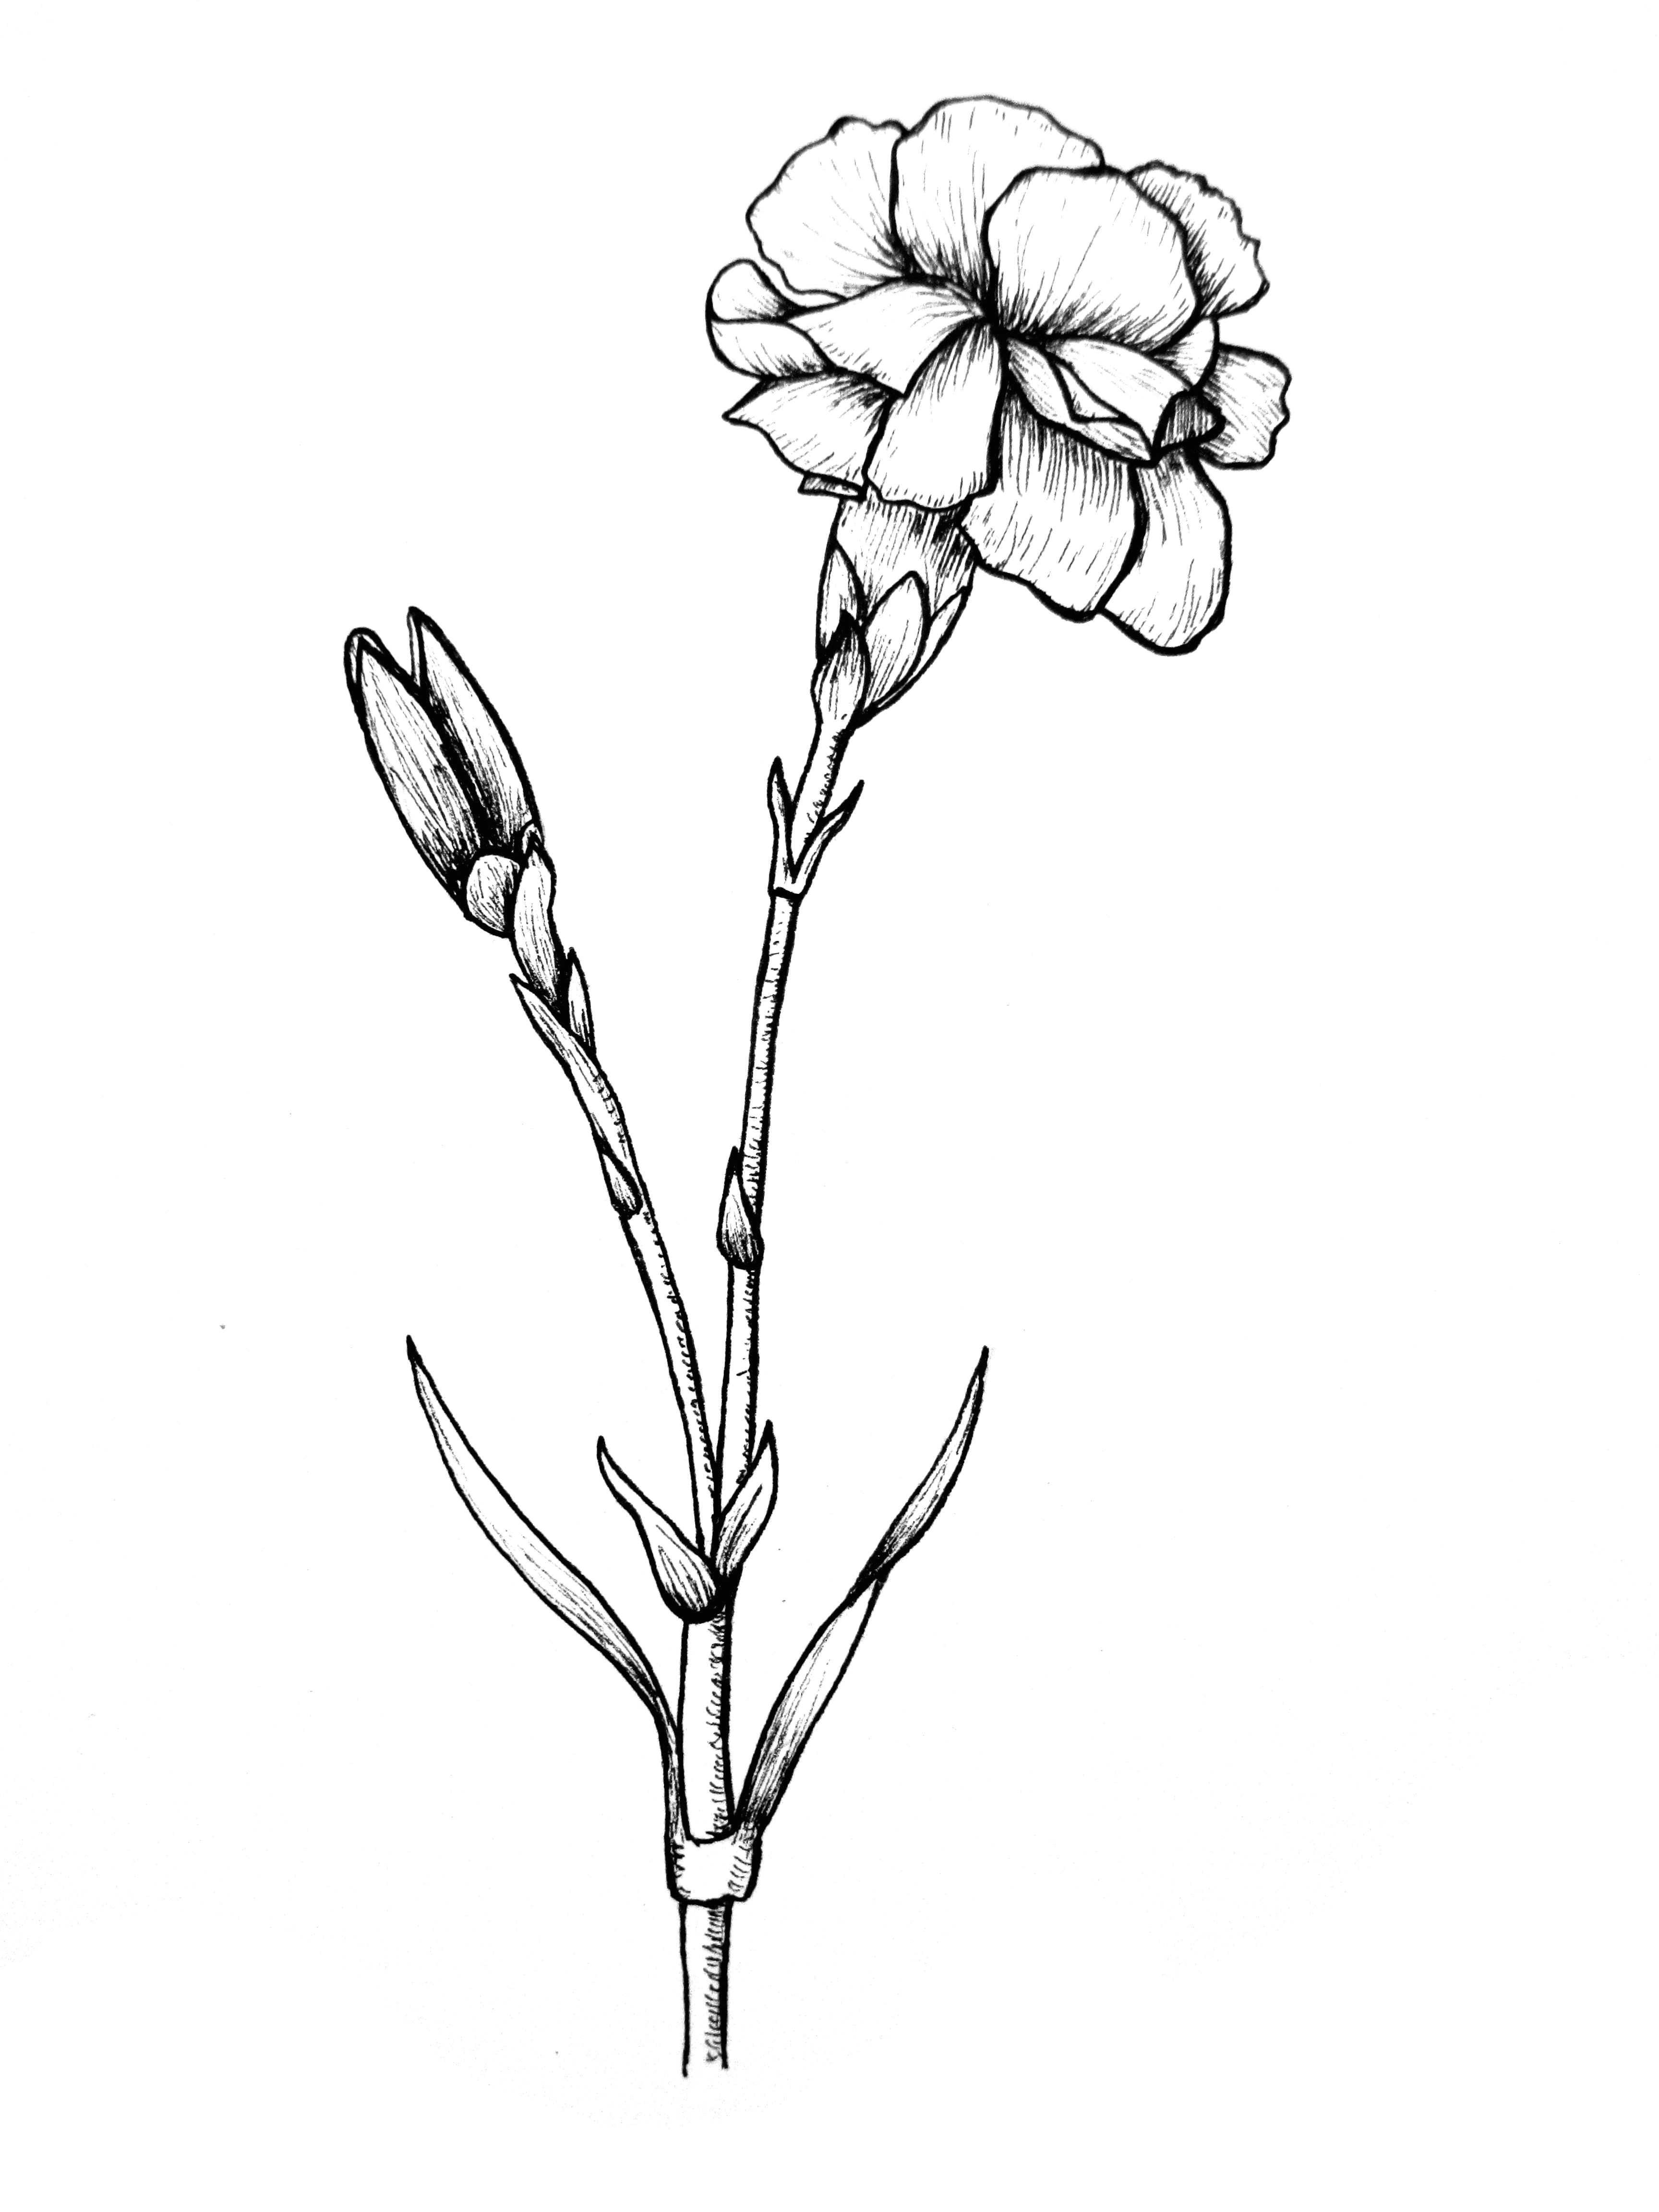 Drawing Of Carnation Flower Awesome Pencil Drawings Of Flowers and Vines Www Pantry Magic Com